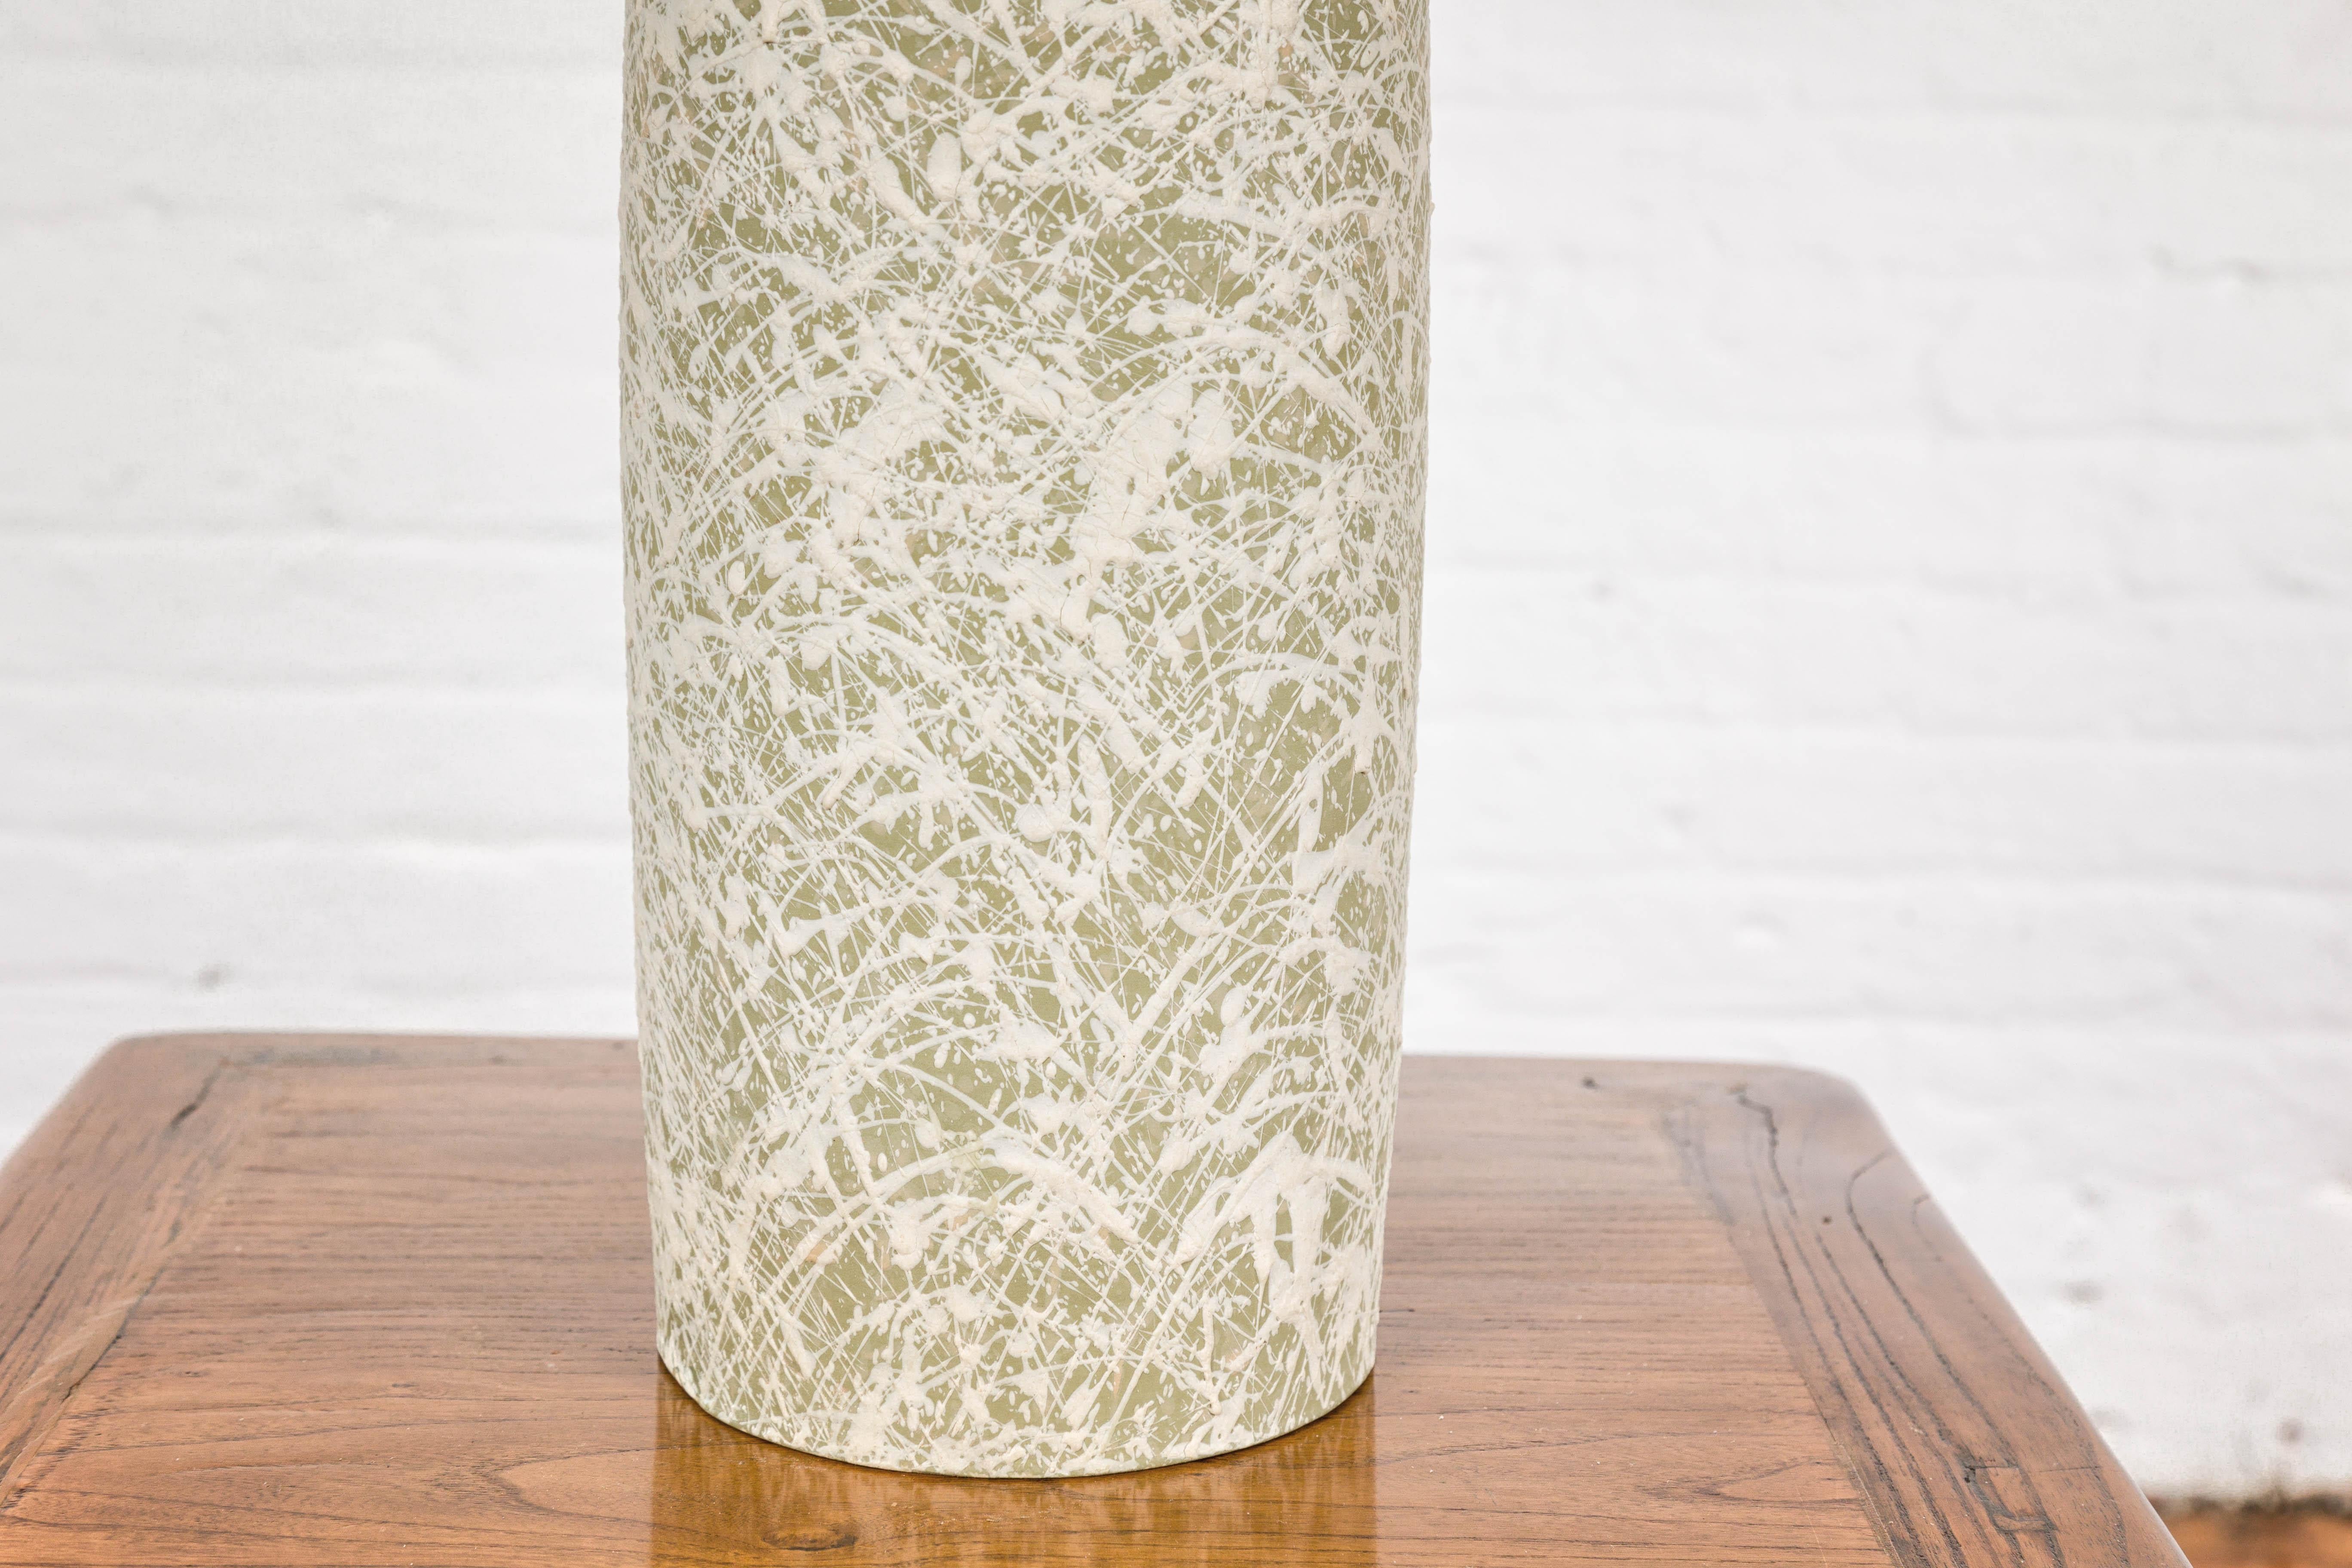 Soft Green and Cream Artisan Ceramic Vase with Energetic Dripping Décor For Sale 3